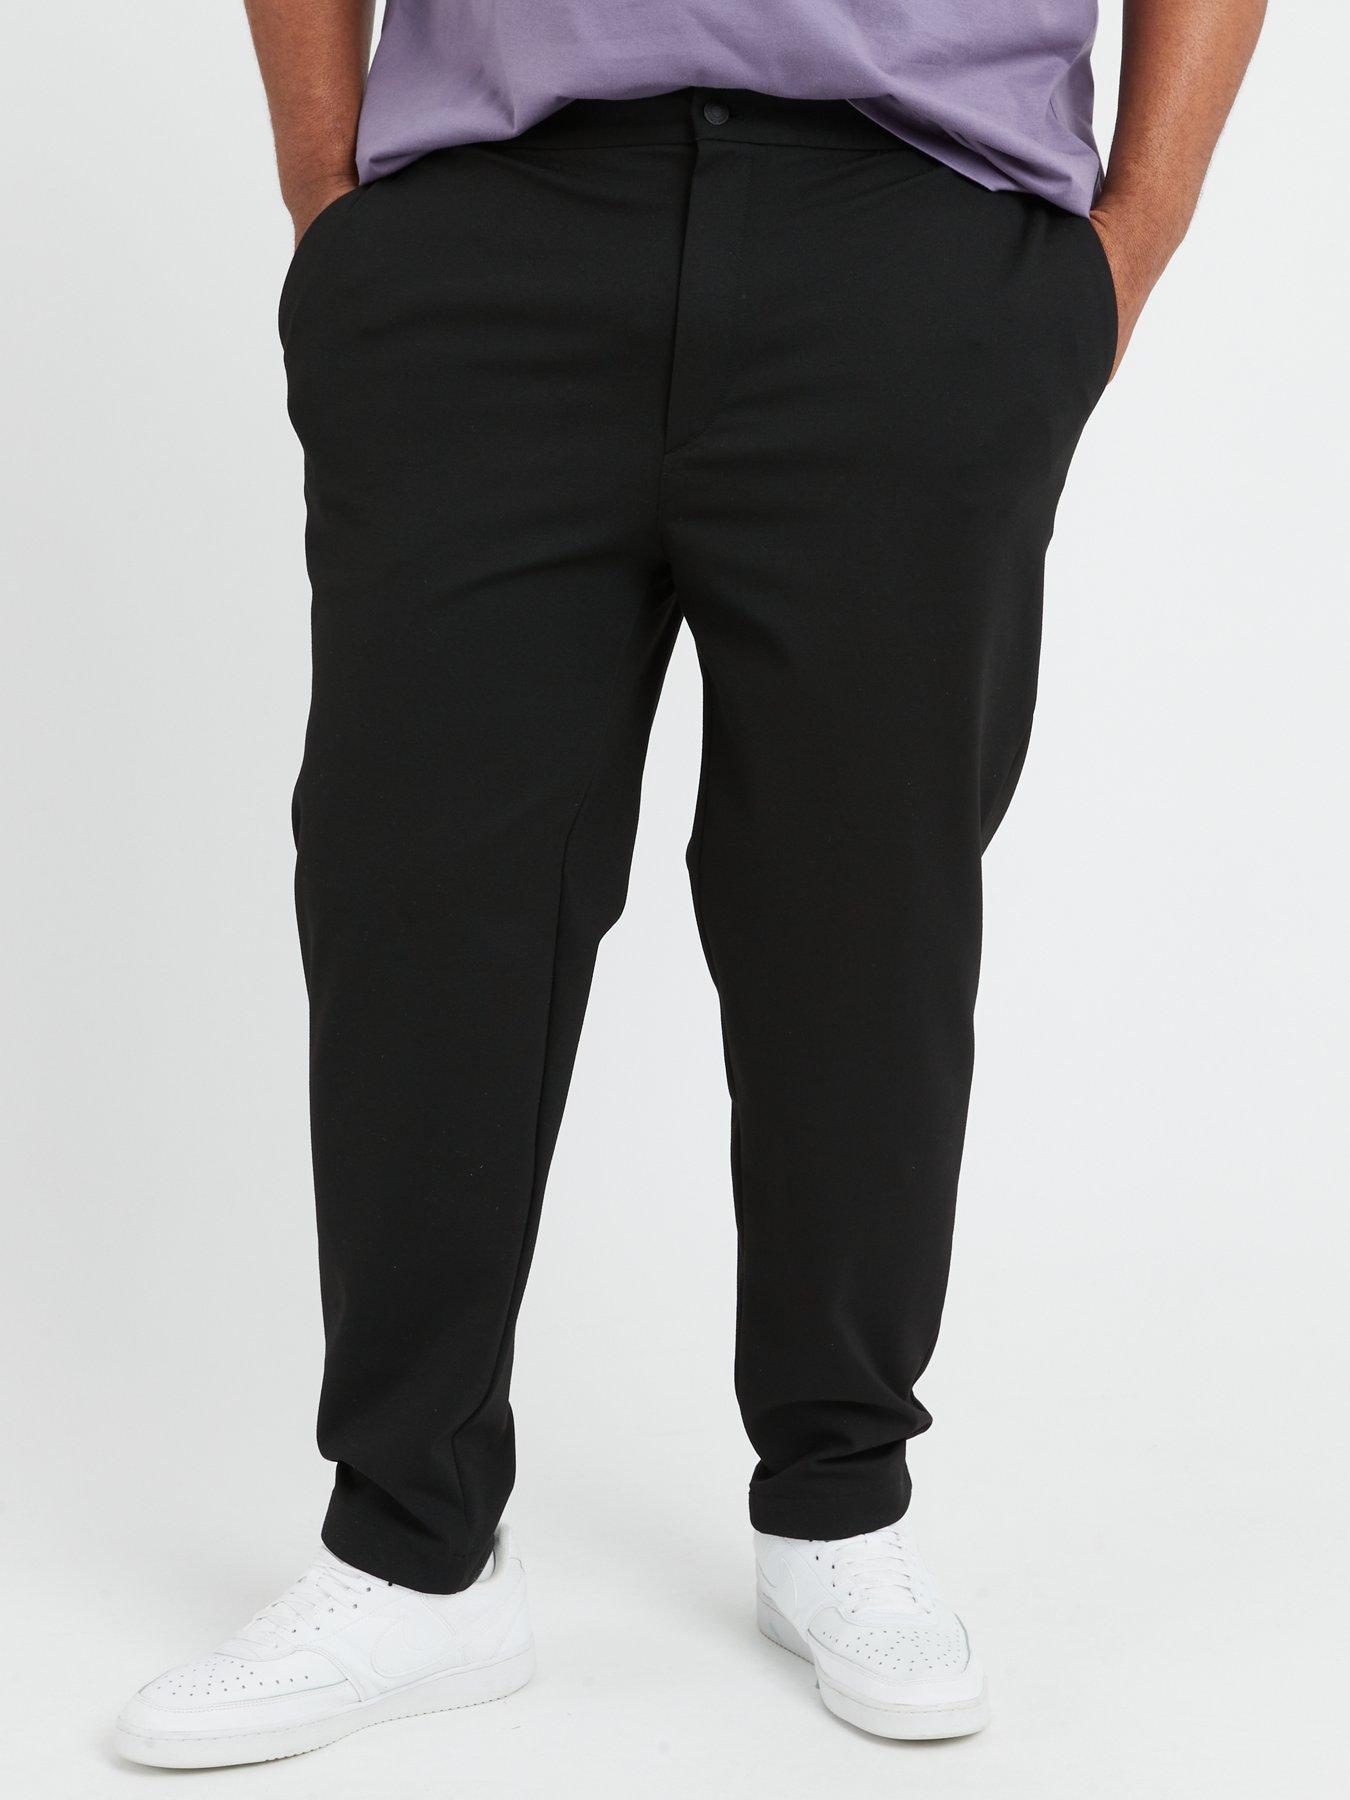 Men's smart brushed cotton trouser from Crew Clothing Company